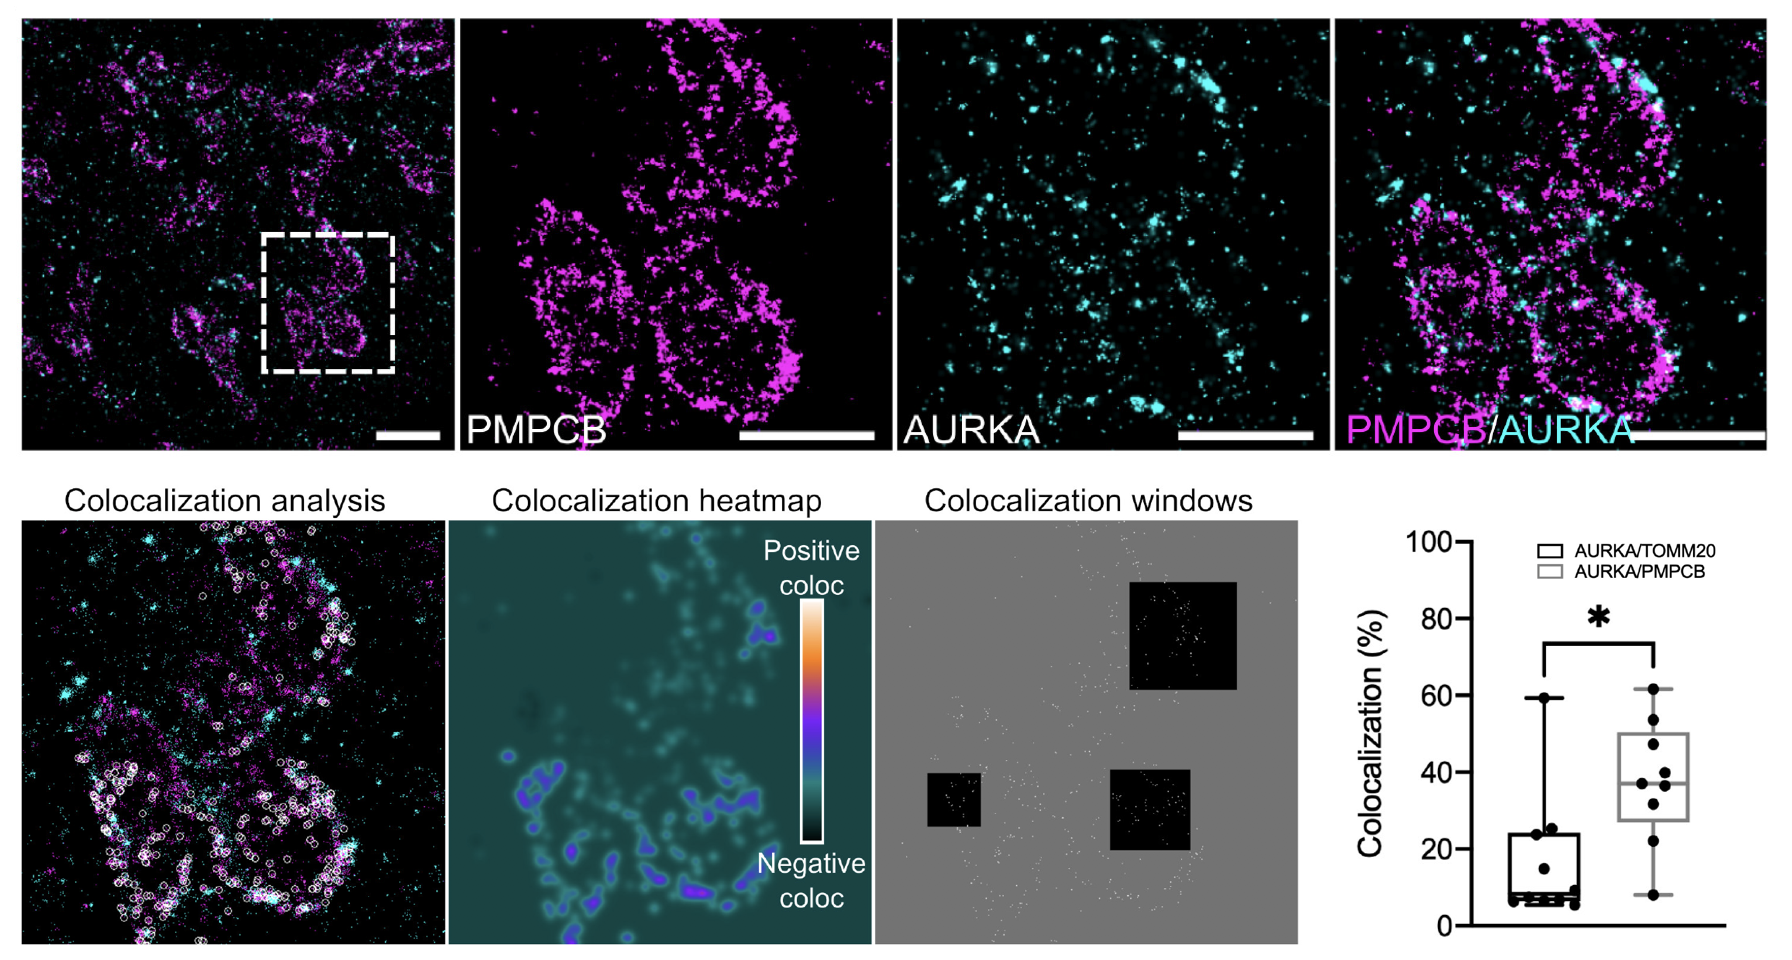 AURKA colocalizes with PMPCB in methanol-fixed cells. Top: Maximal projections of representative 2D dSTORM micrographs from MCF7 co-stained for AURKA and PMPCB (B).
The anti-PMPCB primary antibodies was detected using secondary antibodies conjugated to Alexa647 and pseudocolored magenta, while the anti-AURKA primary antibody was detected using a secondary antibody conjugated to Alexa555 and pseudocolored cyan. For the protein pair, the dotted area in the left panels indicates the magnified region where each staining is shown individually (middle panels), or merged (right panels). Scale bar: 2μm (left) or 1μm (middle and right panels). Bottom: (left panel) Visual representation of positive (white rounds) colocalization sites on the magnified area of AURKA/PMPCB micrographs; (middle panel) Colocalization heatmap ranging from yellow (positive colocalization) to black (negative colocalization), and background (colocalization score arbitrarily set to 0) in green; (right panel). Three representative colocalization windows of 64×6464 \times 64 pixels, 96×9696 \times 96 pixels and 128×128128 \times 128 pixels superimposed over 3 representative positions. For each position, a window center is drawn in the set of super-localizations of the reference
channel, and labeled as a white spot which is used for colocalization. All windows centers are shown; (statistics panel) Quantification of the percentage of colocalization for the indicated protein pairs. Data range from min to max. Dots correspond to individual cells issued from n=3n = 3 independent experiments. * P <0.05.